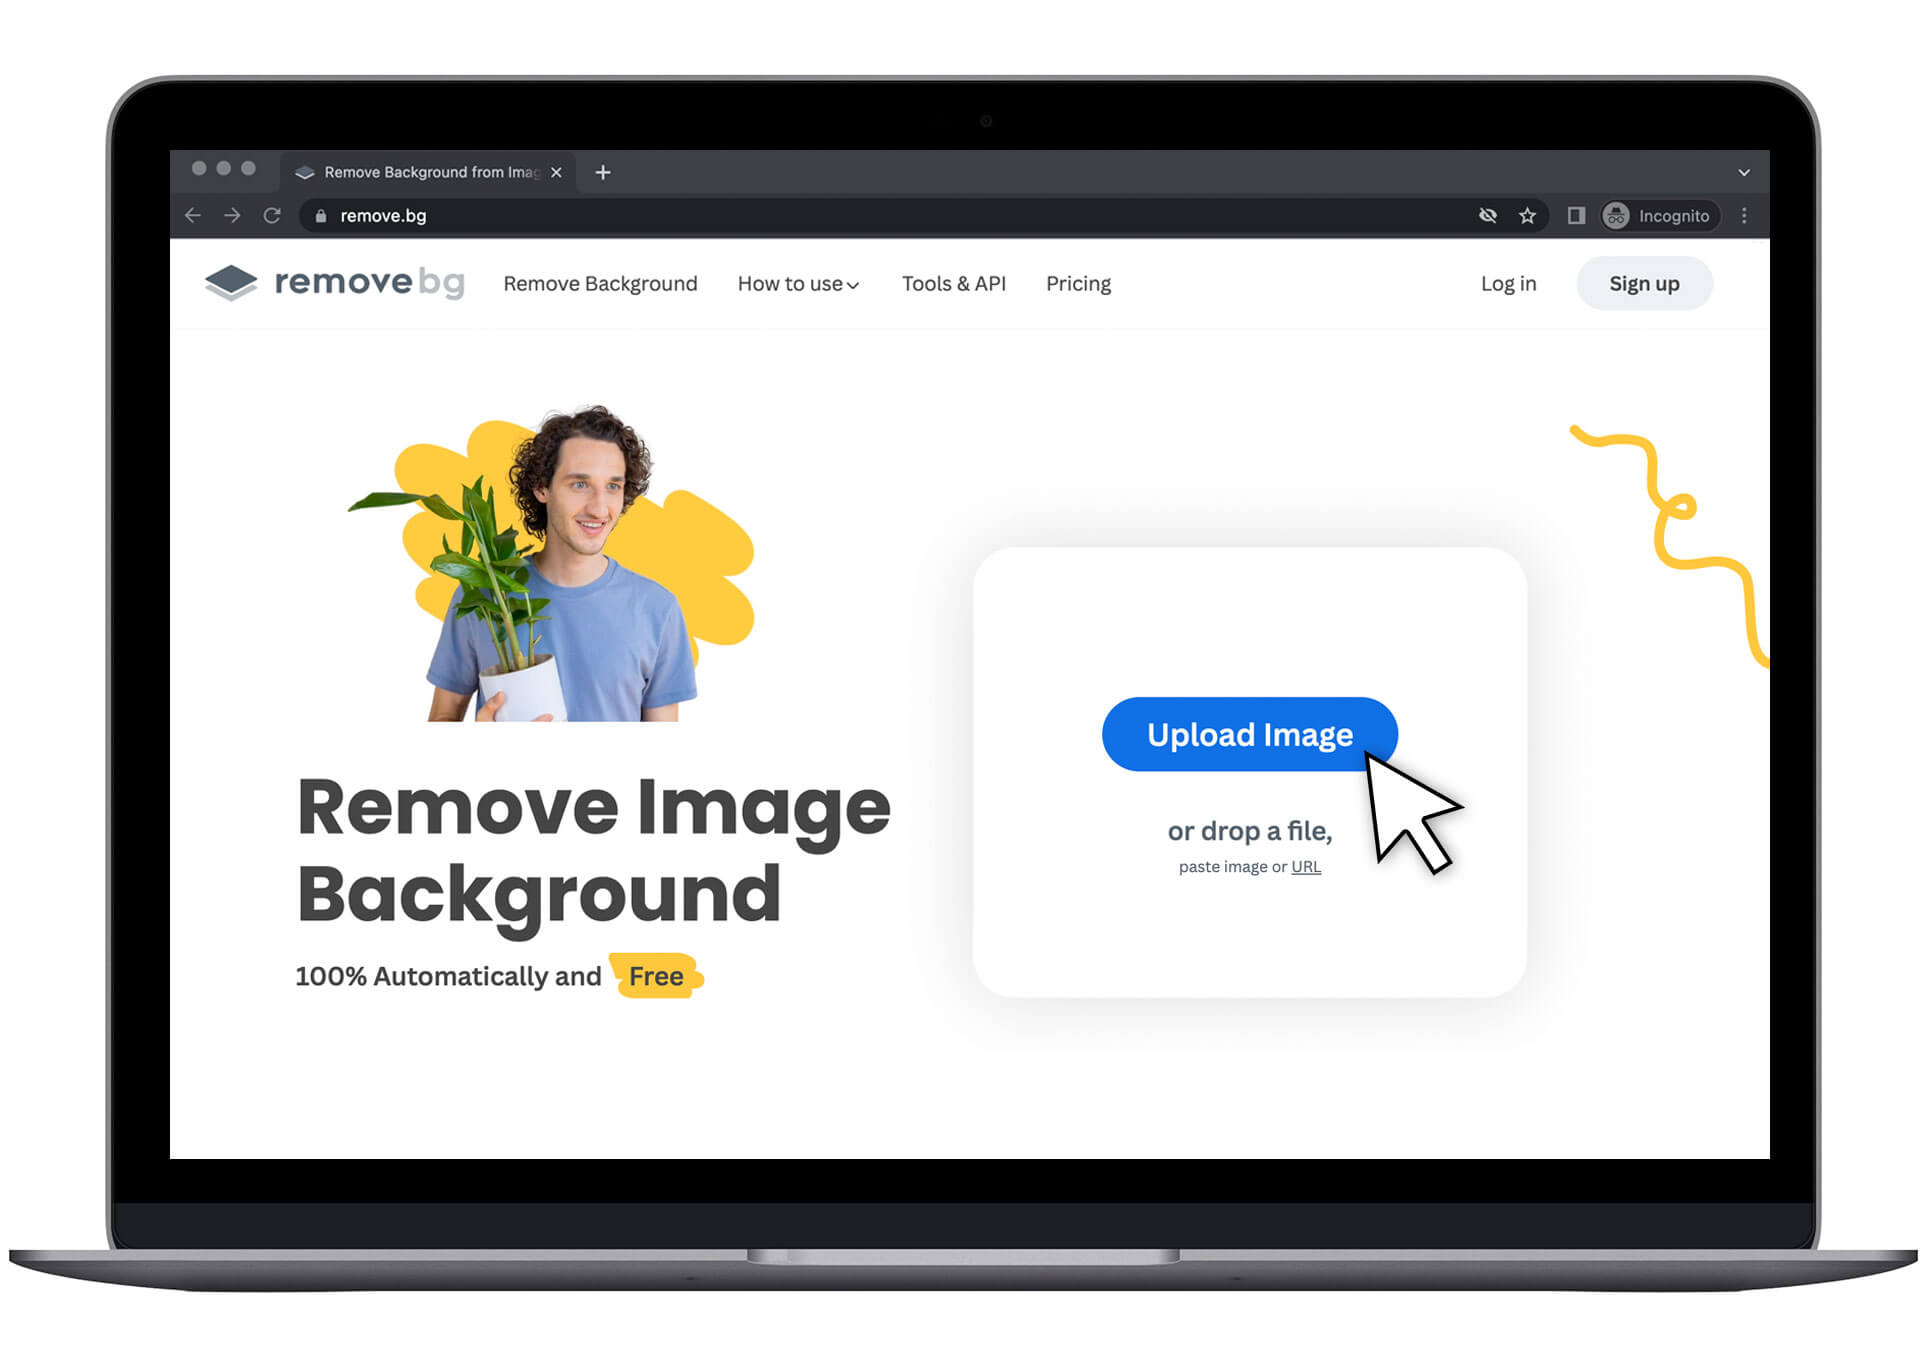 Remove.bg: Features, Pros, Cons and Step-by-Step Approach